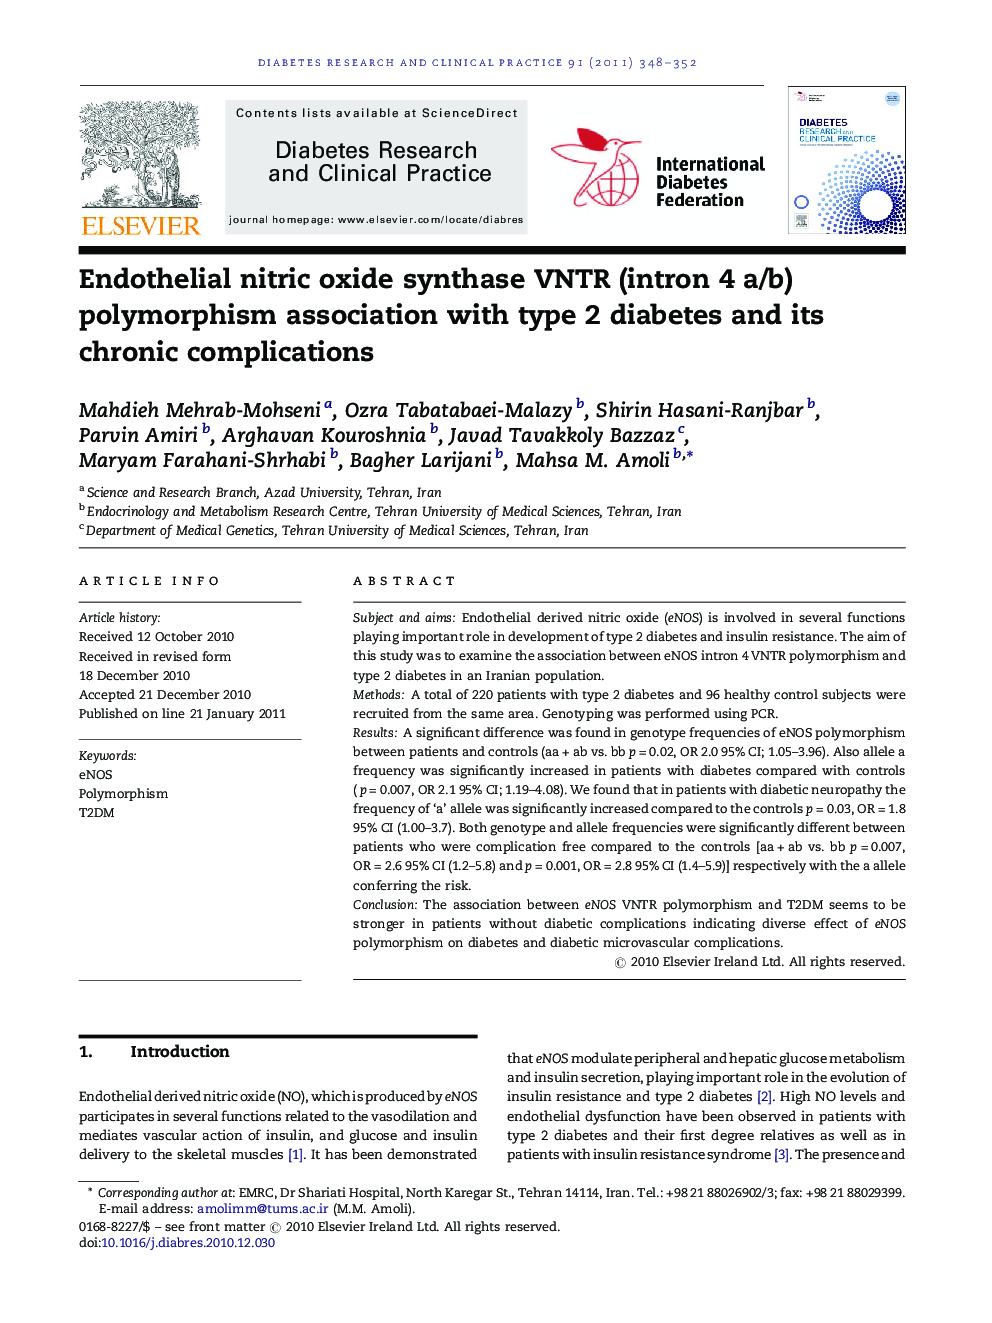 Endothelial nitric oxide synthase VNTR (intron 4 a/b) polymorphism association with type 2 diabetes and its chronic complications